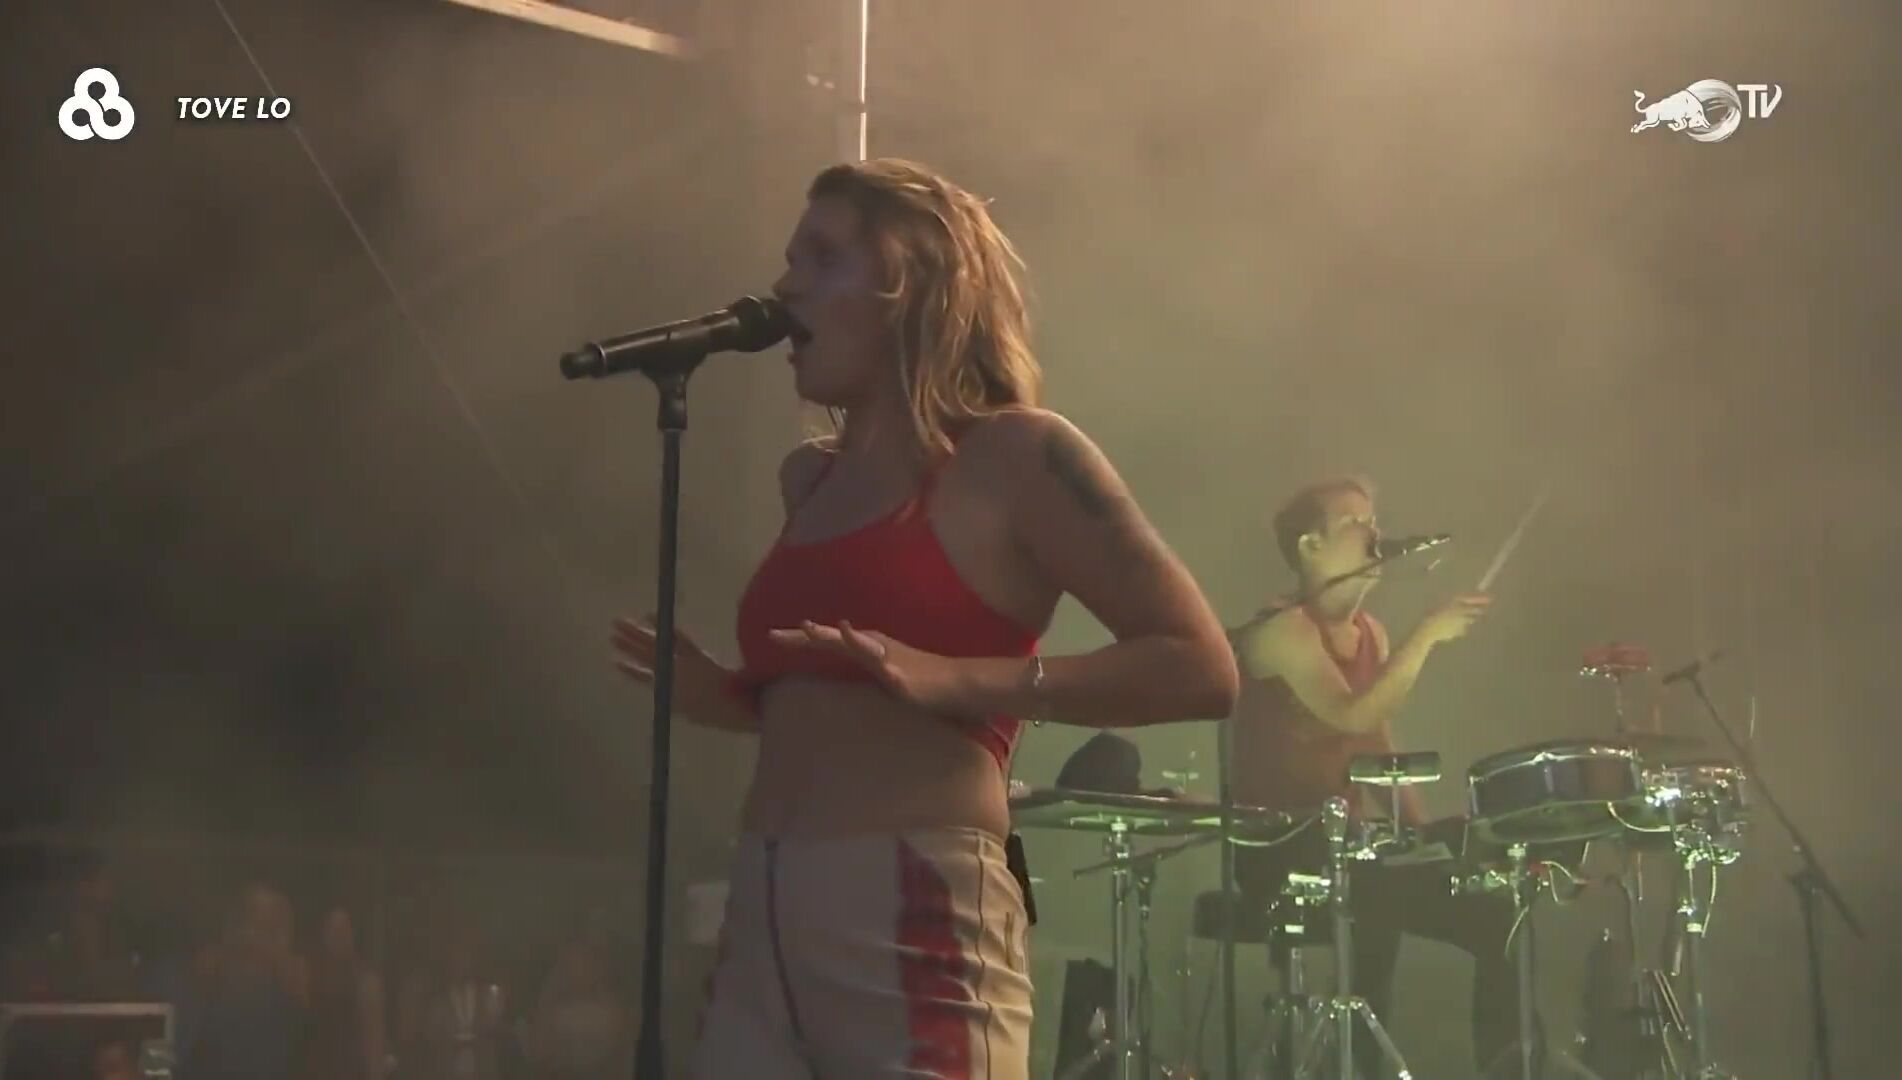 Bbw Concert moments full of shame and excitement when Tove Lo nude exposes boobies on stage Gay Boysporn - 1